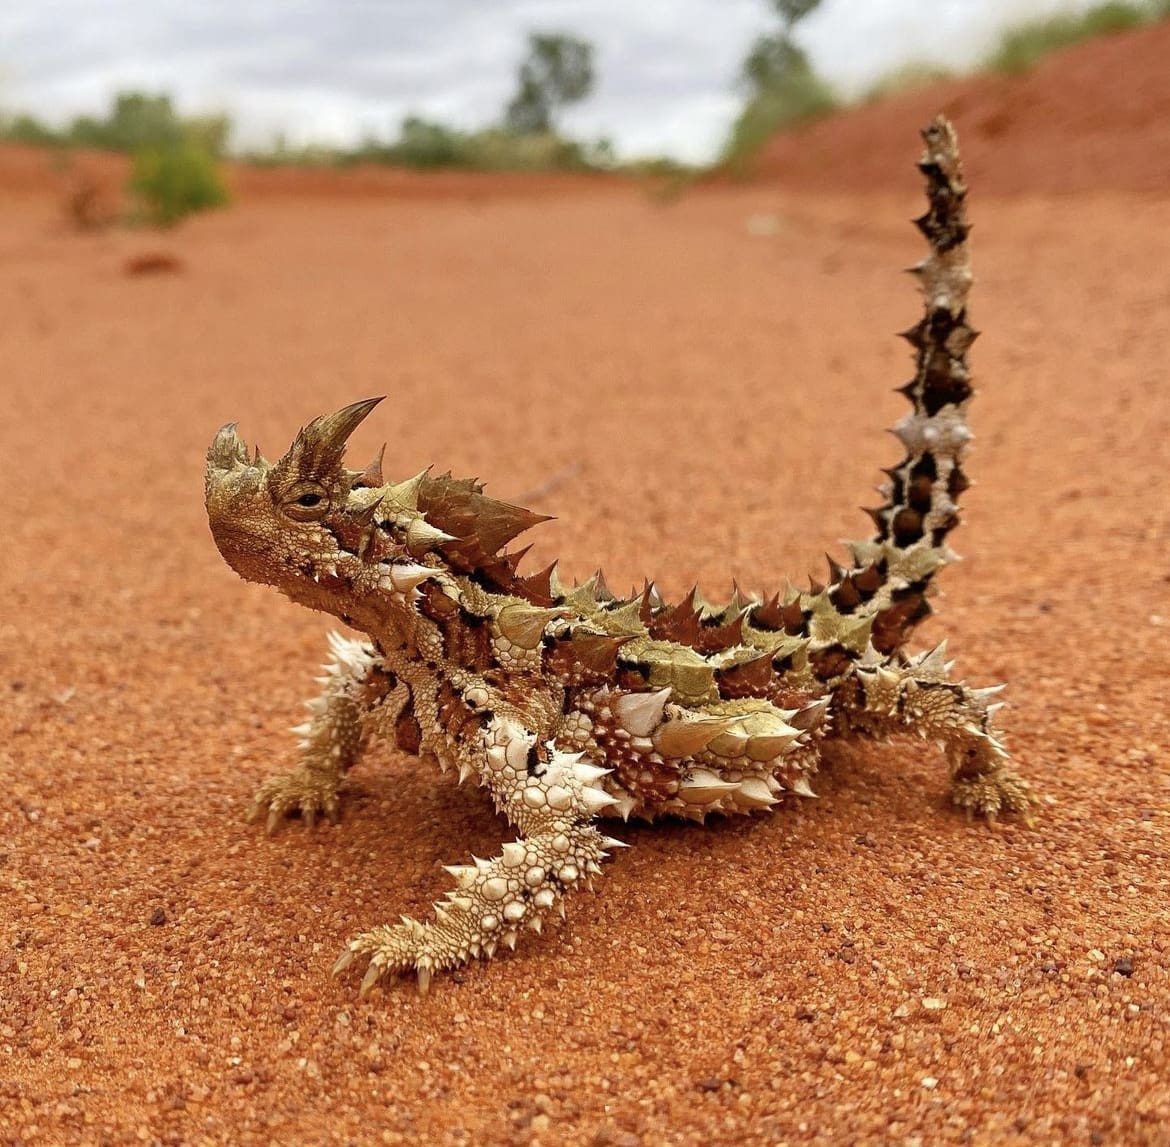 The Thorny Devil - one of the coolest animals on earth